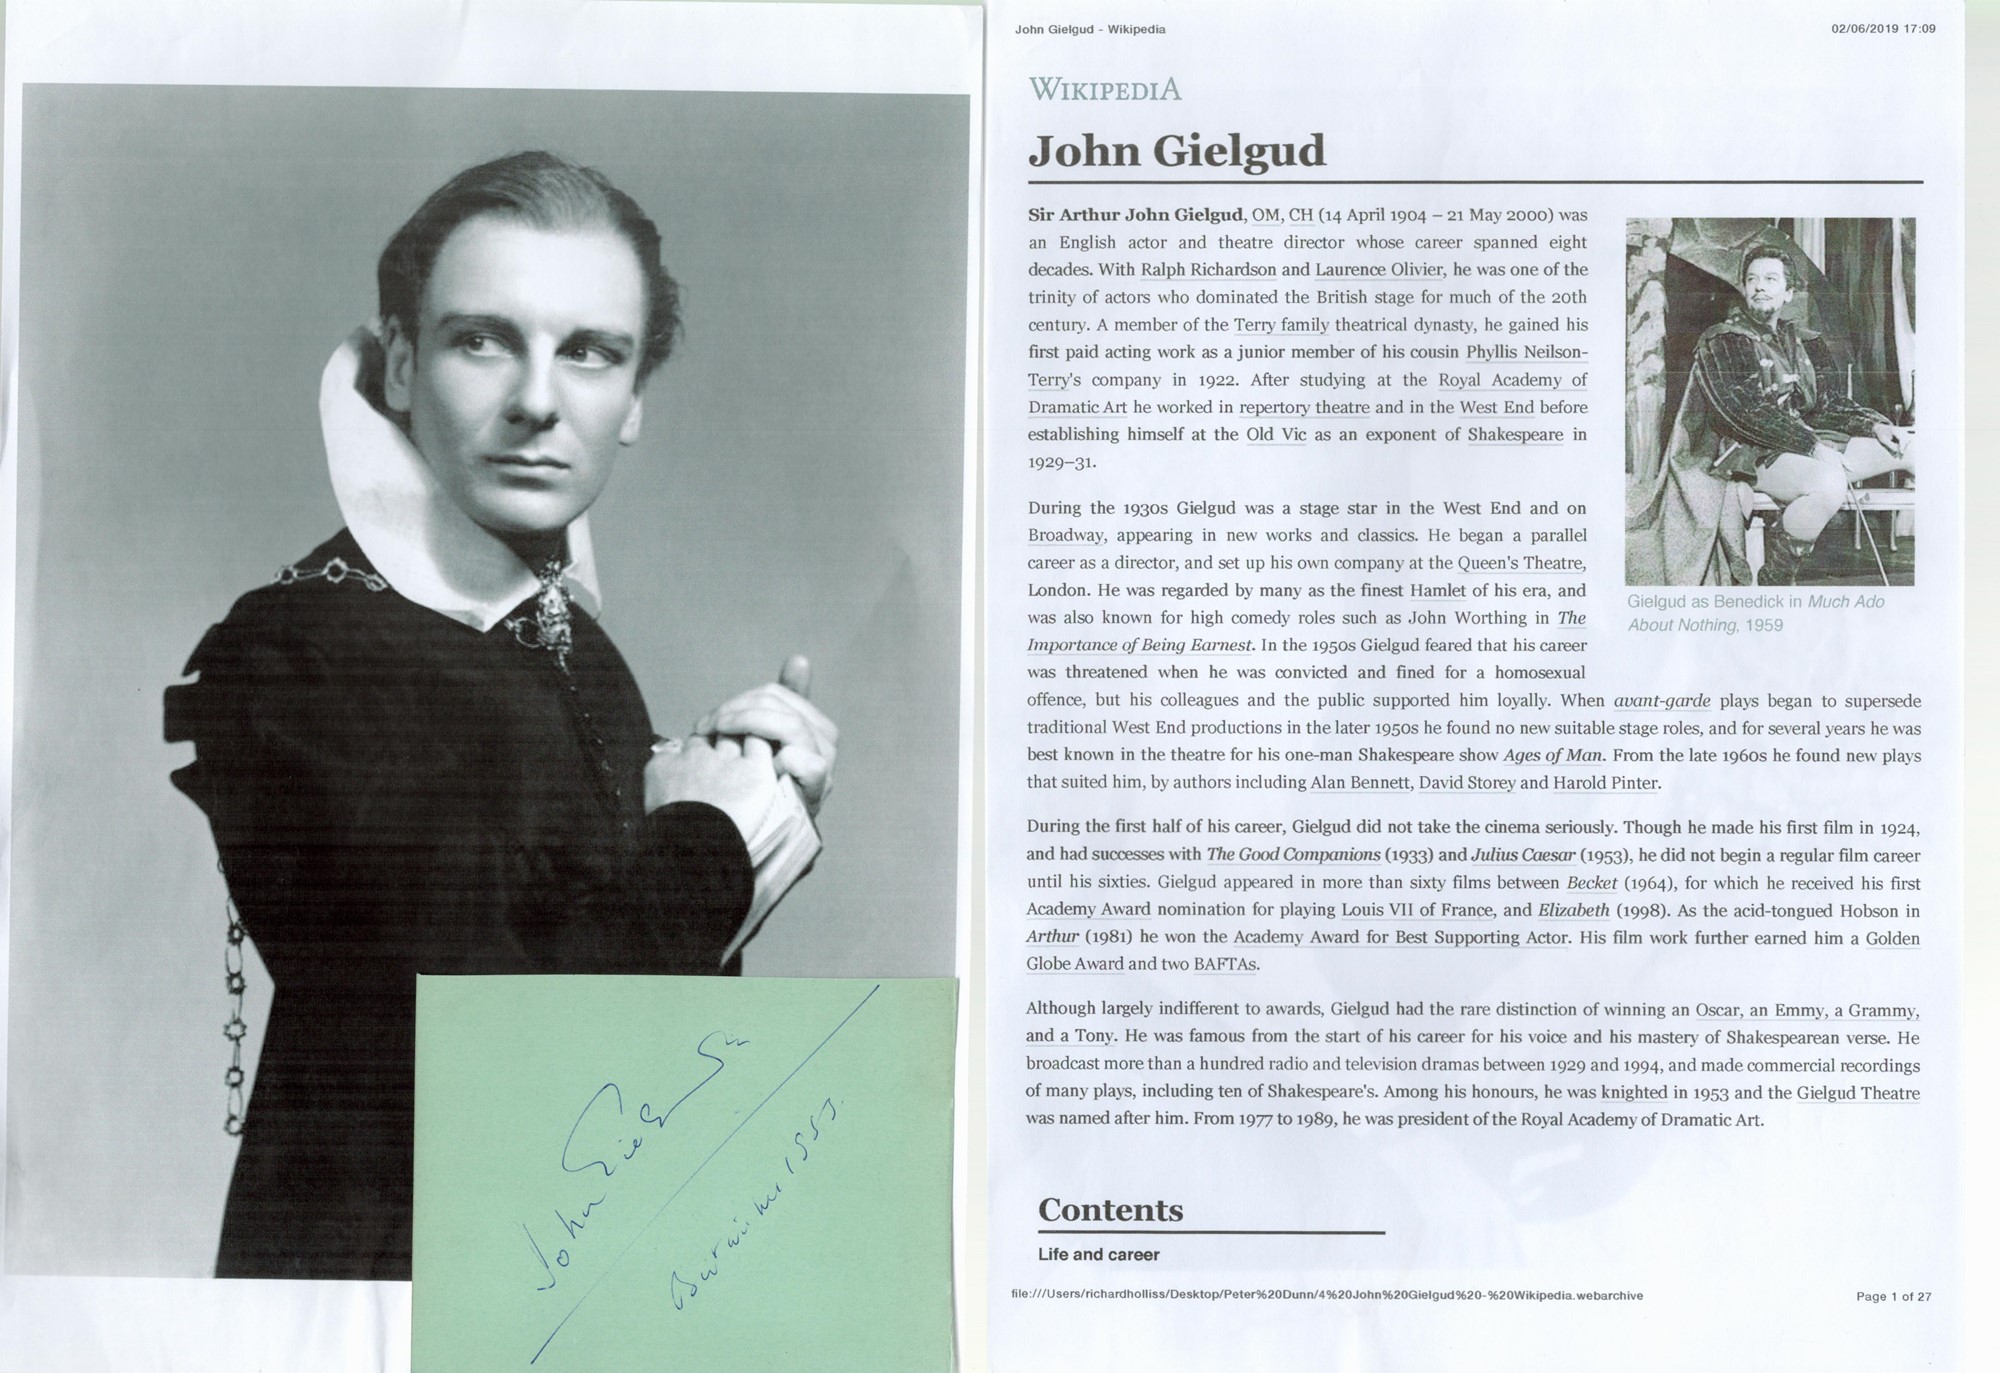 John Gielgud signed 5x3 Album Page. Gielgud, OM, CH was an English actor and theatre director - Image 2 of 2